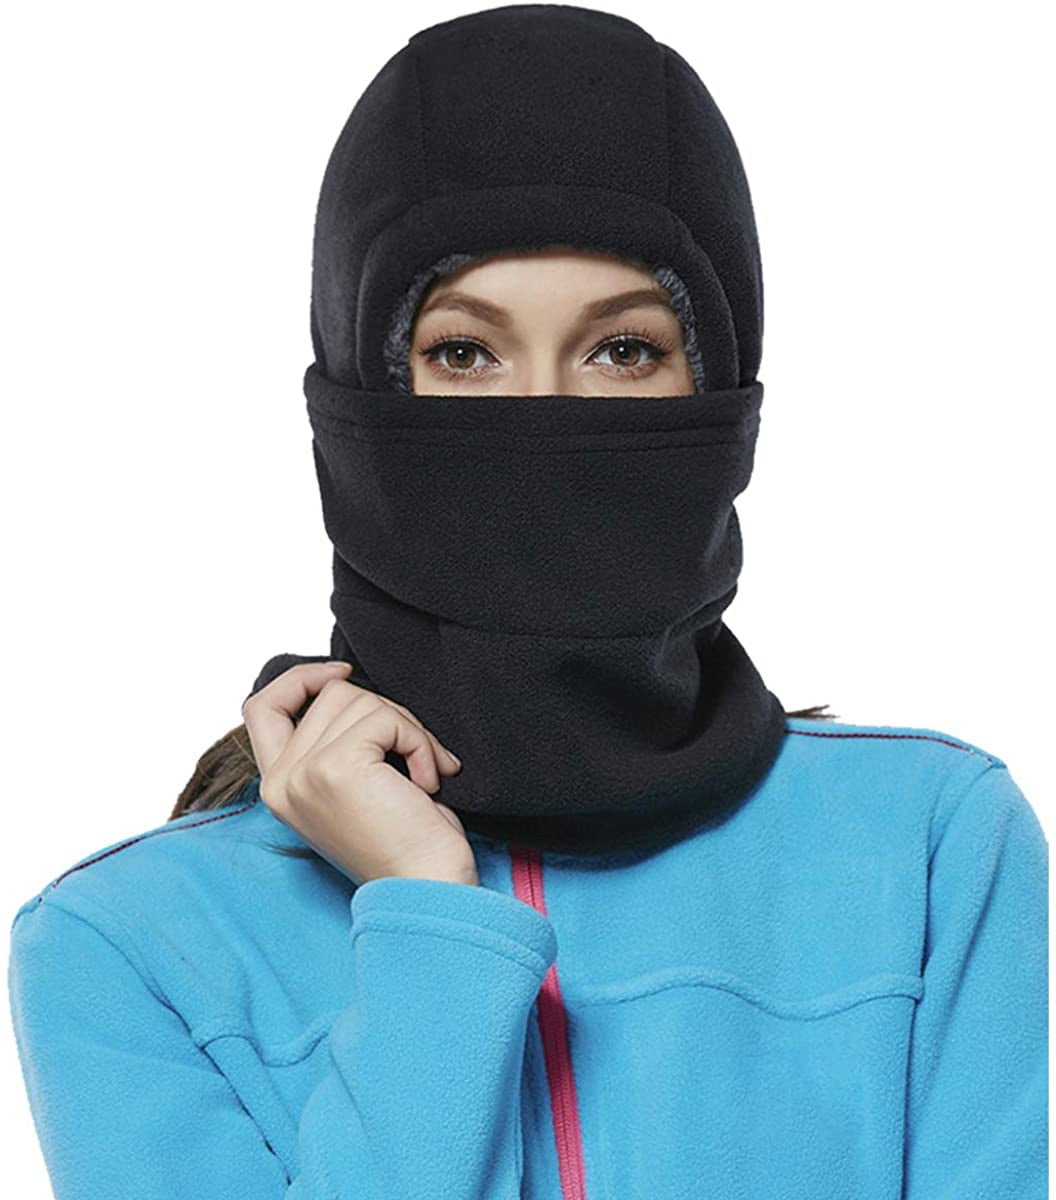 Winter Thermal Fleece Riding Half Face Cover Windprood Coldproof Warm Balaclava 